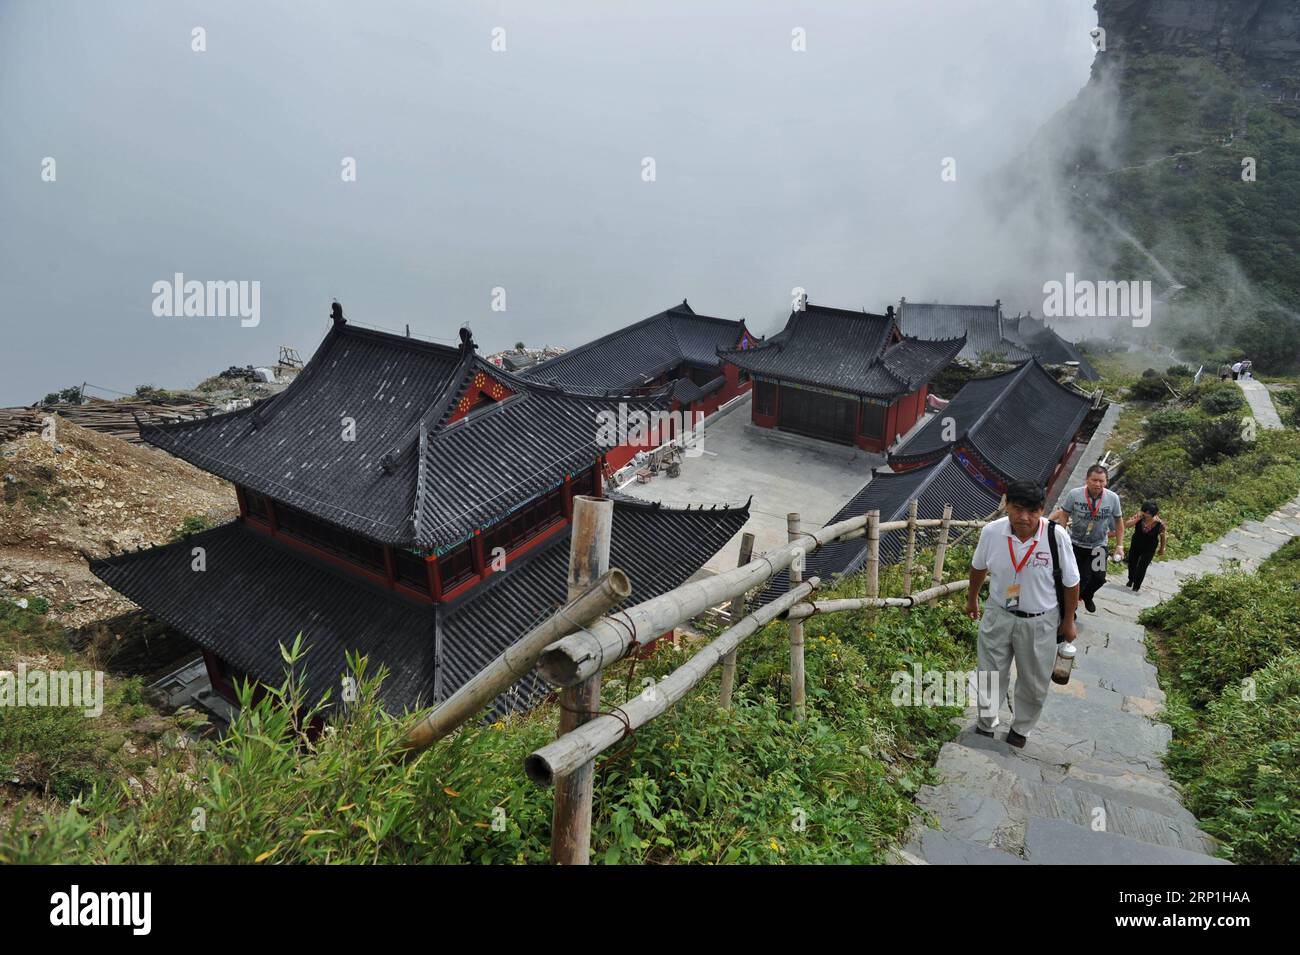 (180707) -- GUIYANG, July 7, 2018 -- Tourists go sightseeing at the Mount Fanjingshan scenic spot in Tongren City, southwest China s Guizhou Province, Sept. 6, 2011. Mount Fanjingshan was inscribed on the World Heritage List on July 2, 2018 at the 42nd World Heritage Committee meeting in Bahrain. The ecosystem of Fanjingshan has preserved large numbers of ancient relict plants, rare and endangered creatures, as well as unique species. ) (sxk) CHINA-GUIZHOU-MOUNT FANJINGSHAN-WORLD HERITAGE (CN) OuxDongqu PUBLICATIONxNOTxINxCHN Stock Photo